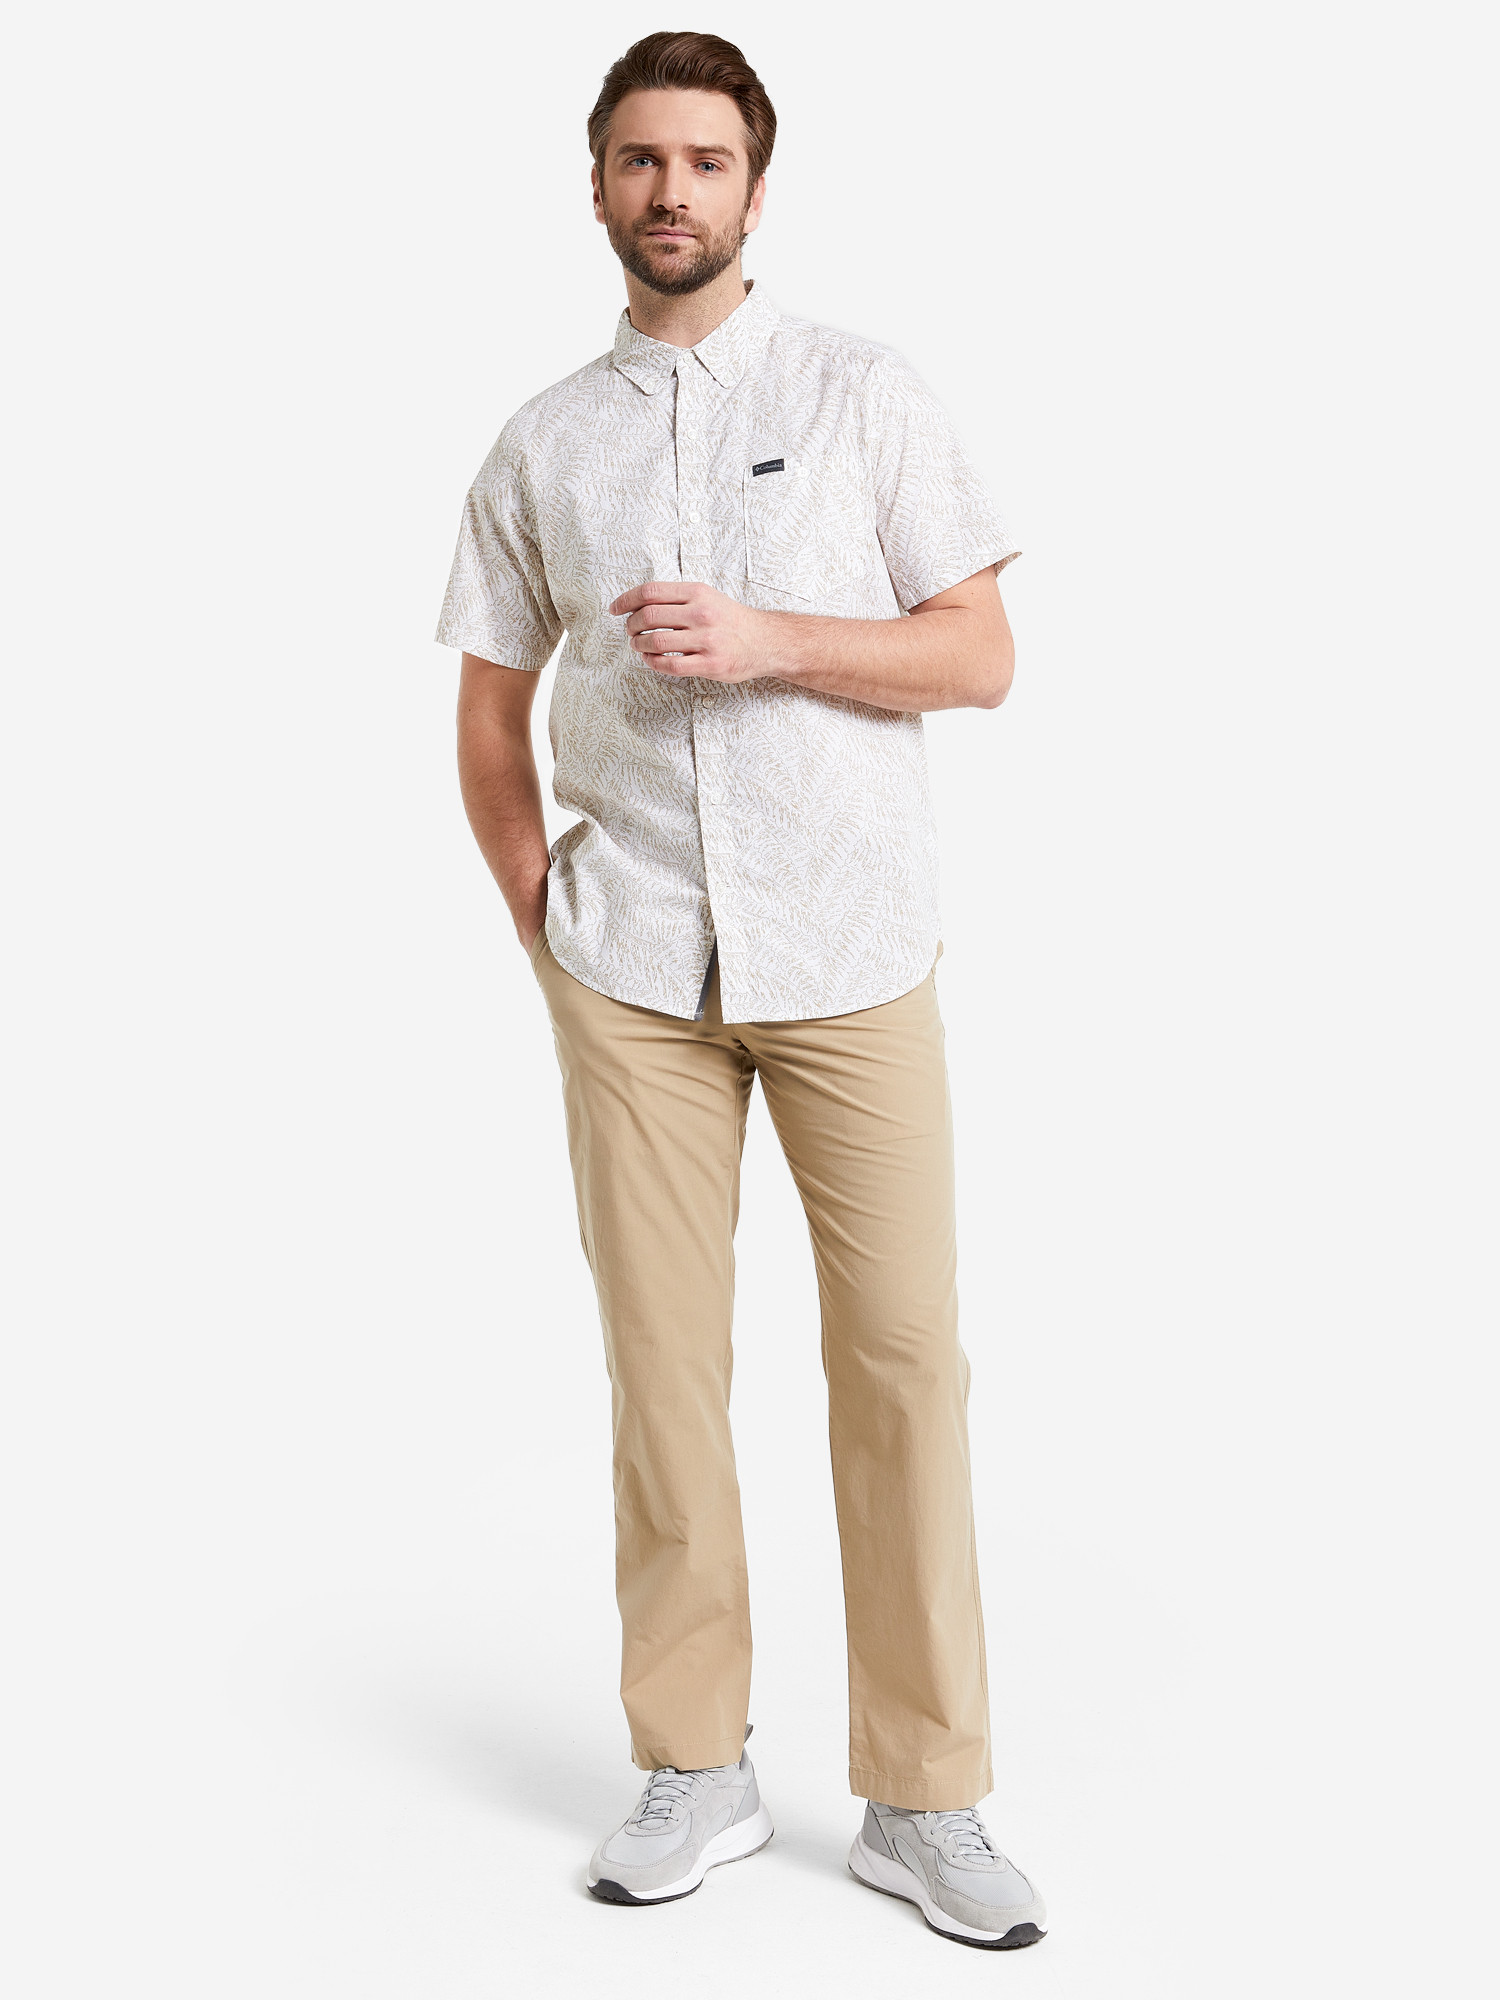 Брюки мужские Columbia Washed Out Pant